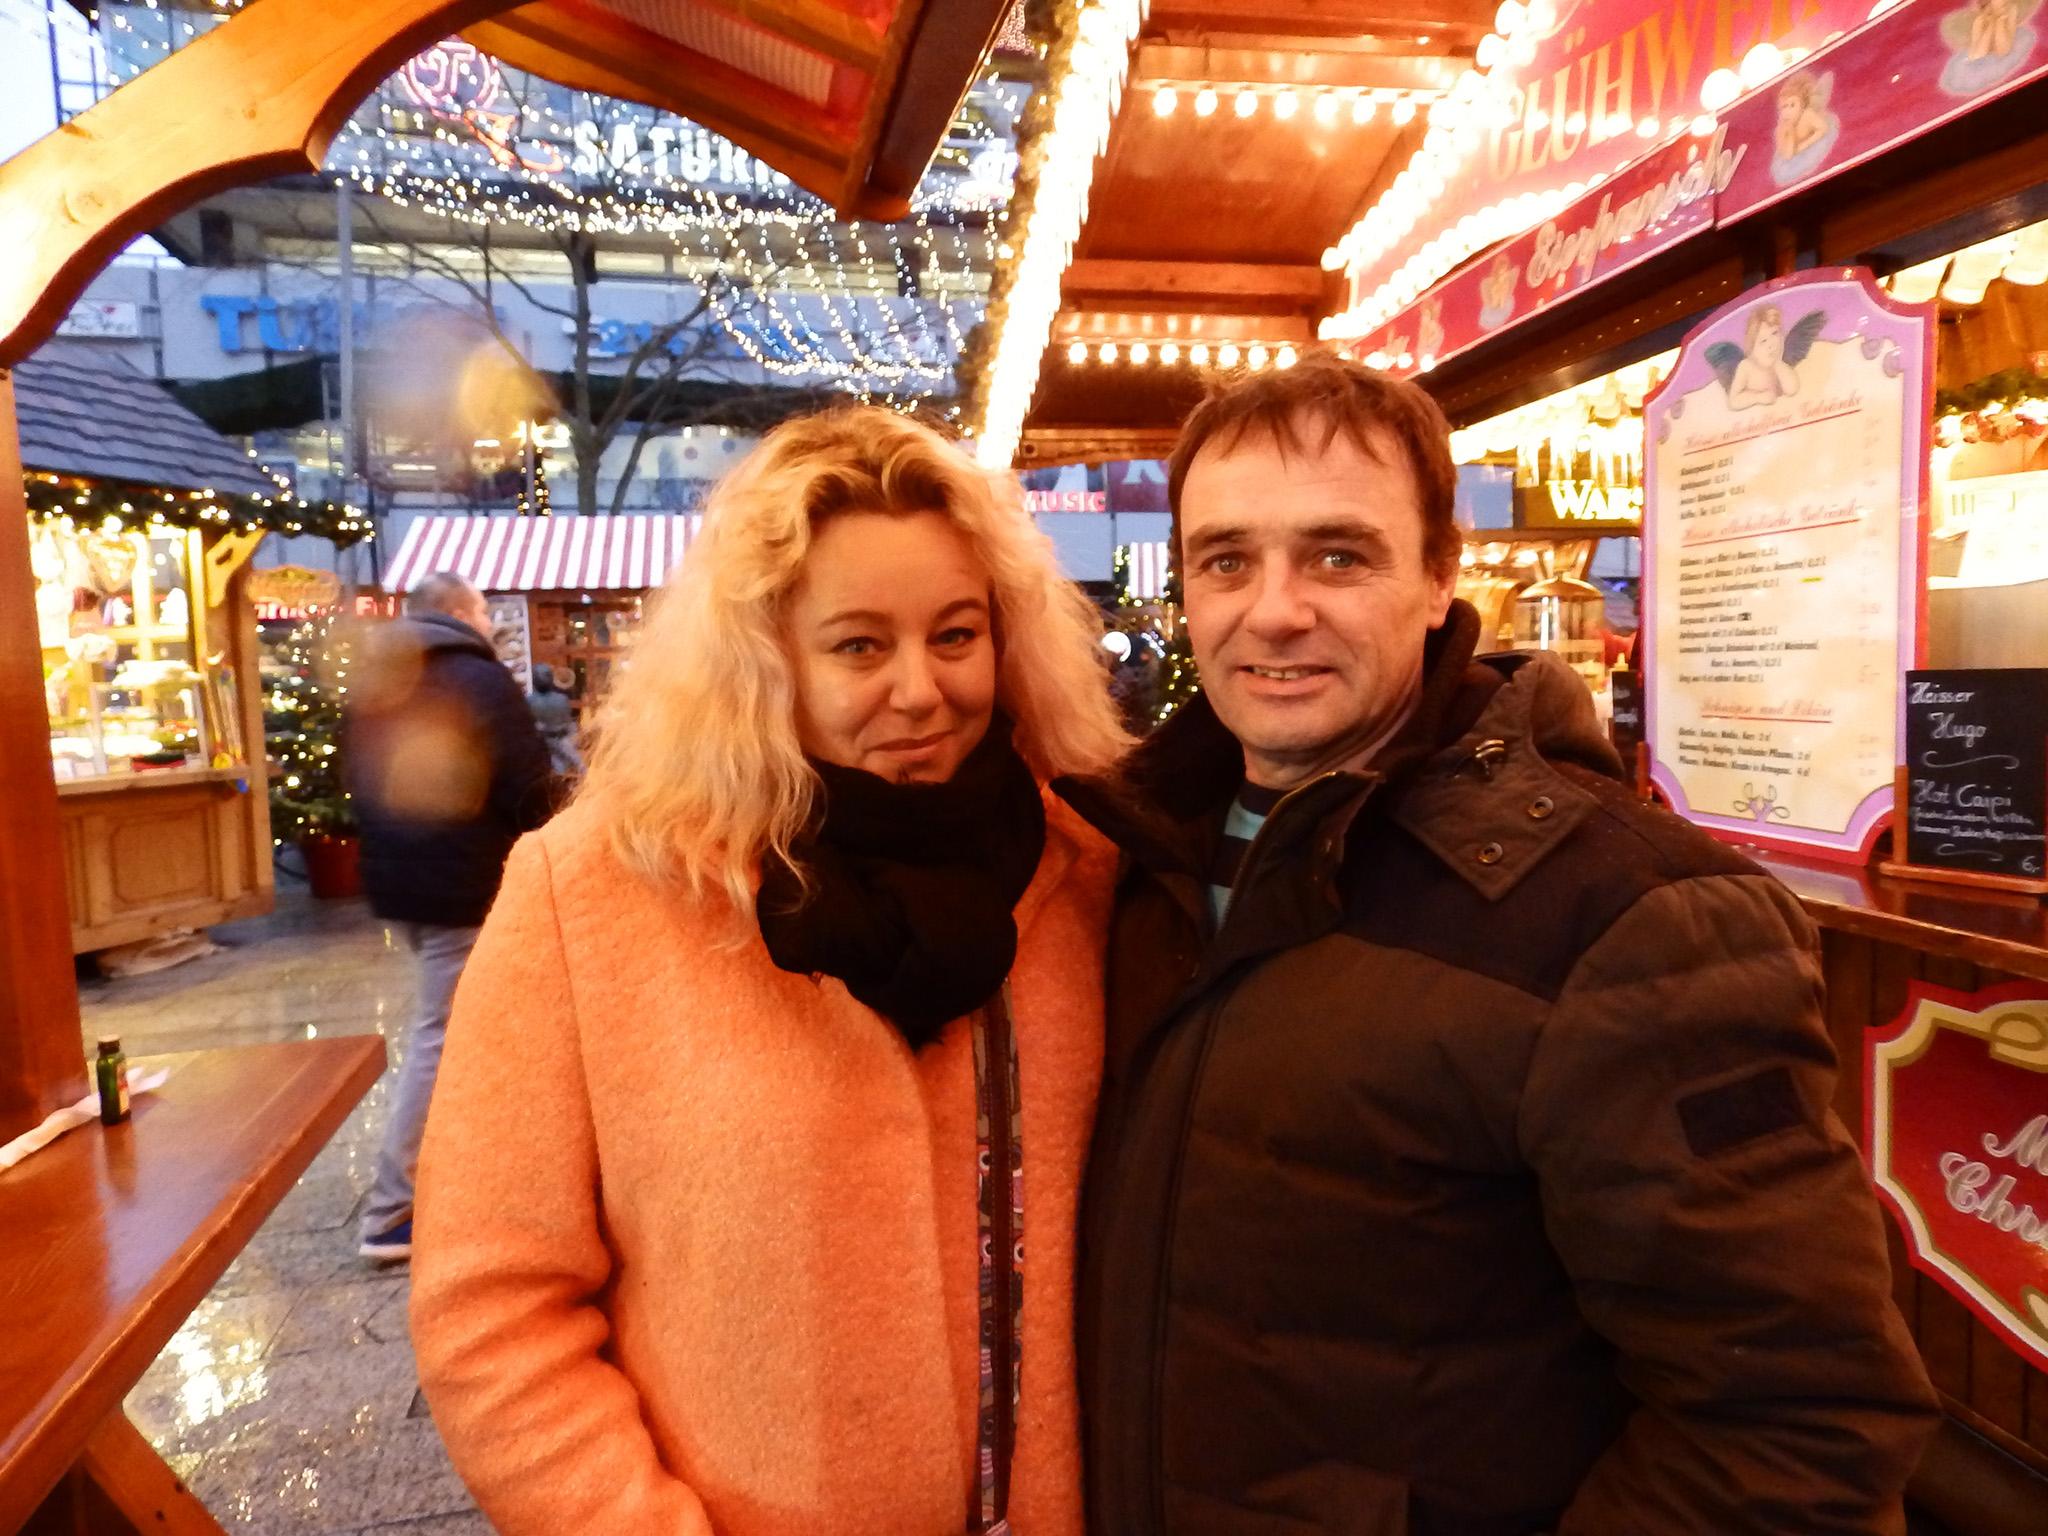 Robert and Pamela Maloney from County Wicklow in Ireland, at the reopened Christmas market next to the Kaiser Wilhelm Memorial Church in Berlin